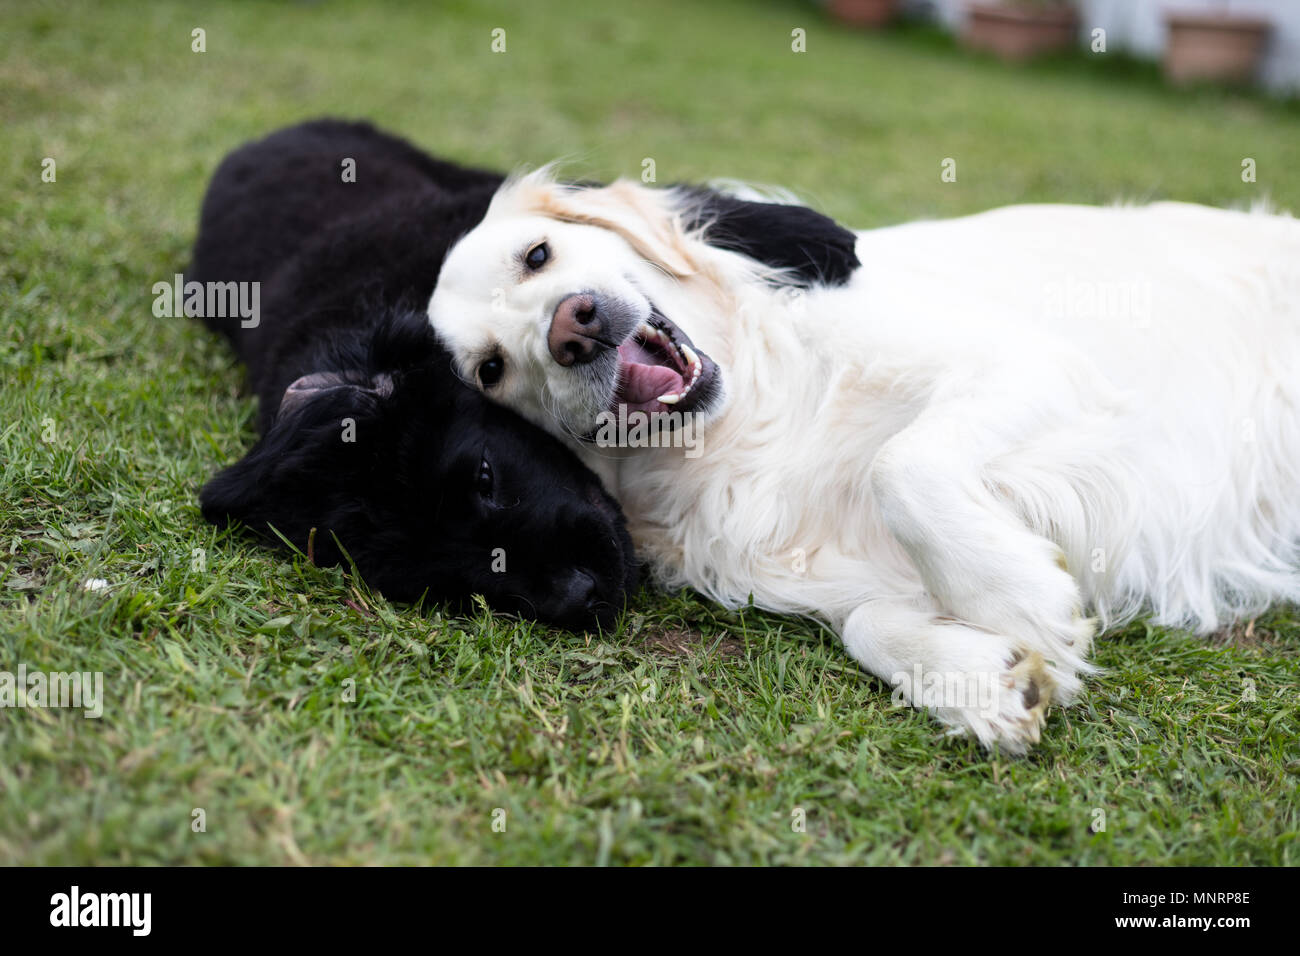 Purebred black newfoundland puppy playing with a white golden retriever  adult dog Stock Photo - Alamy